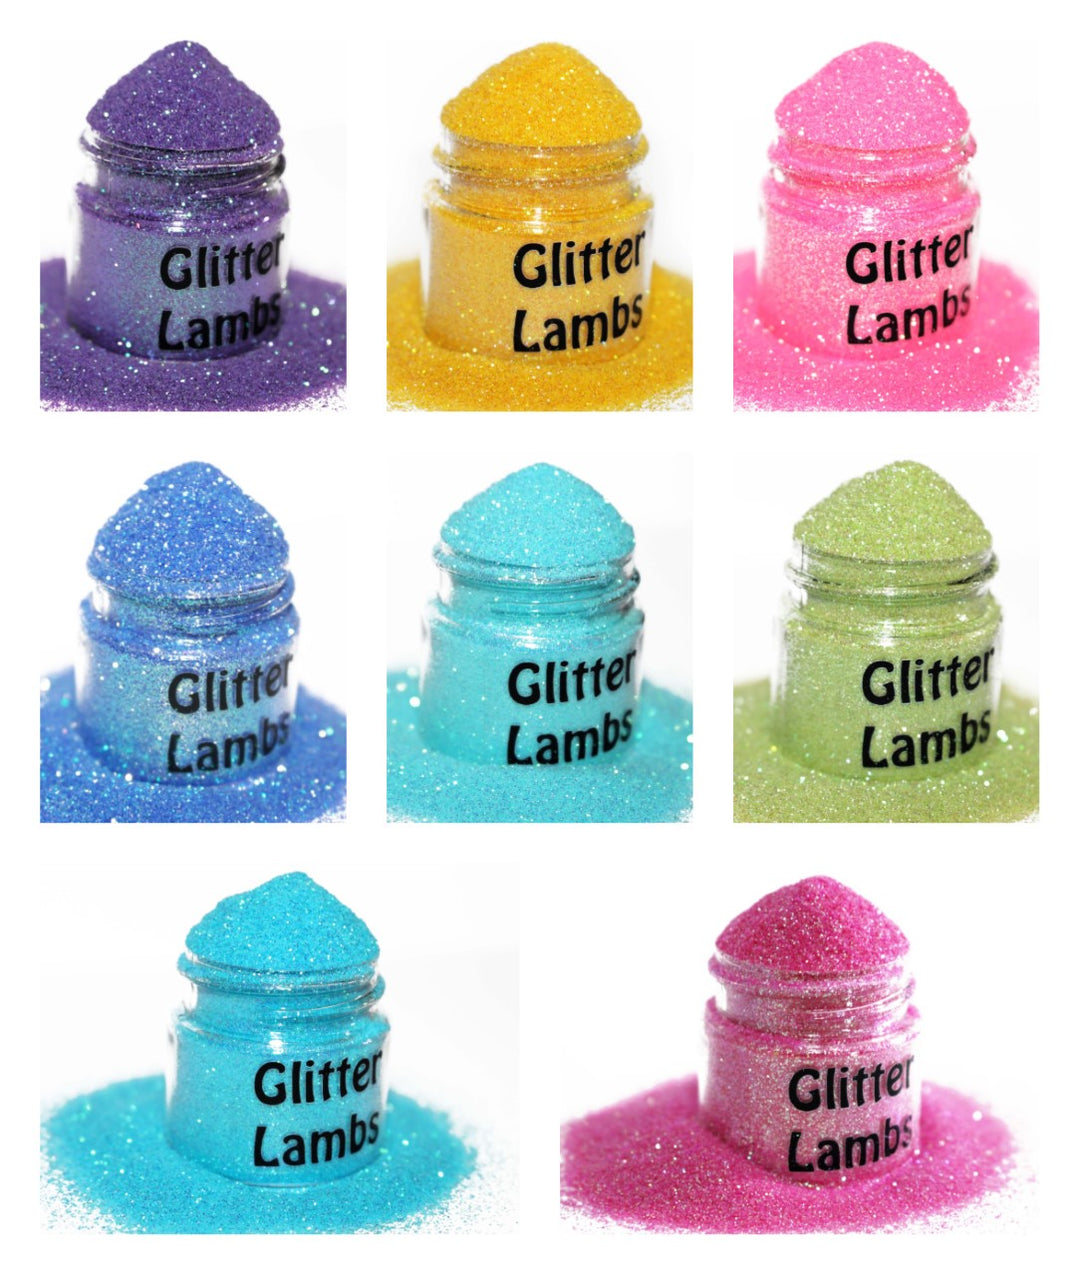 Jelly Bean Glitter Collection by GlitterLambs.com